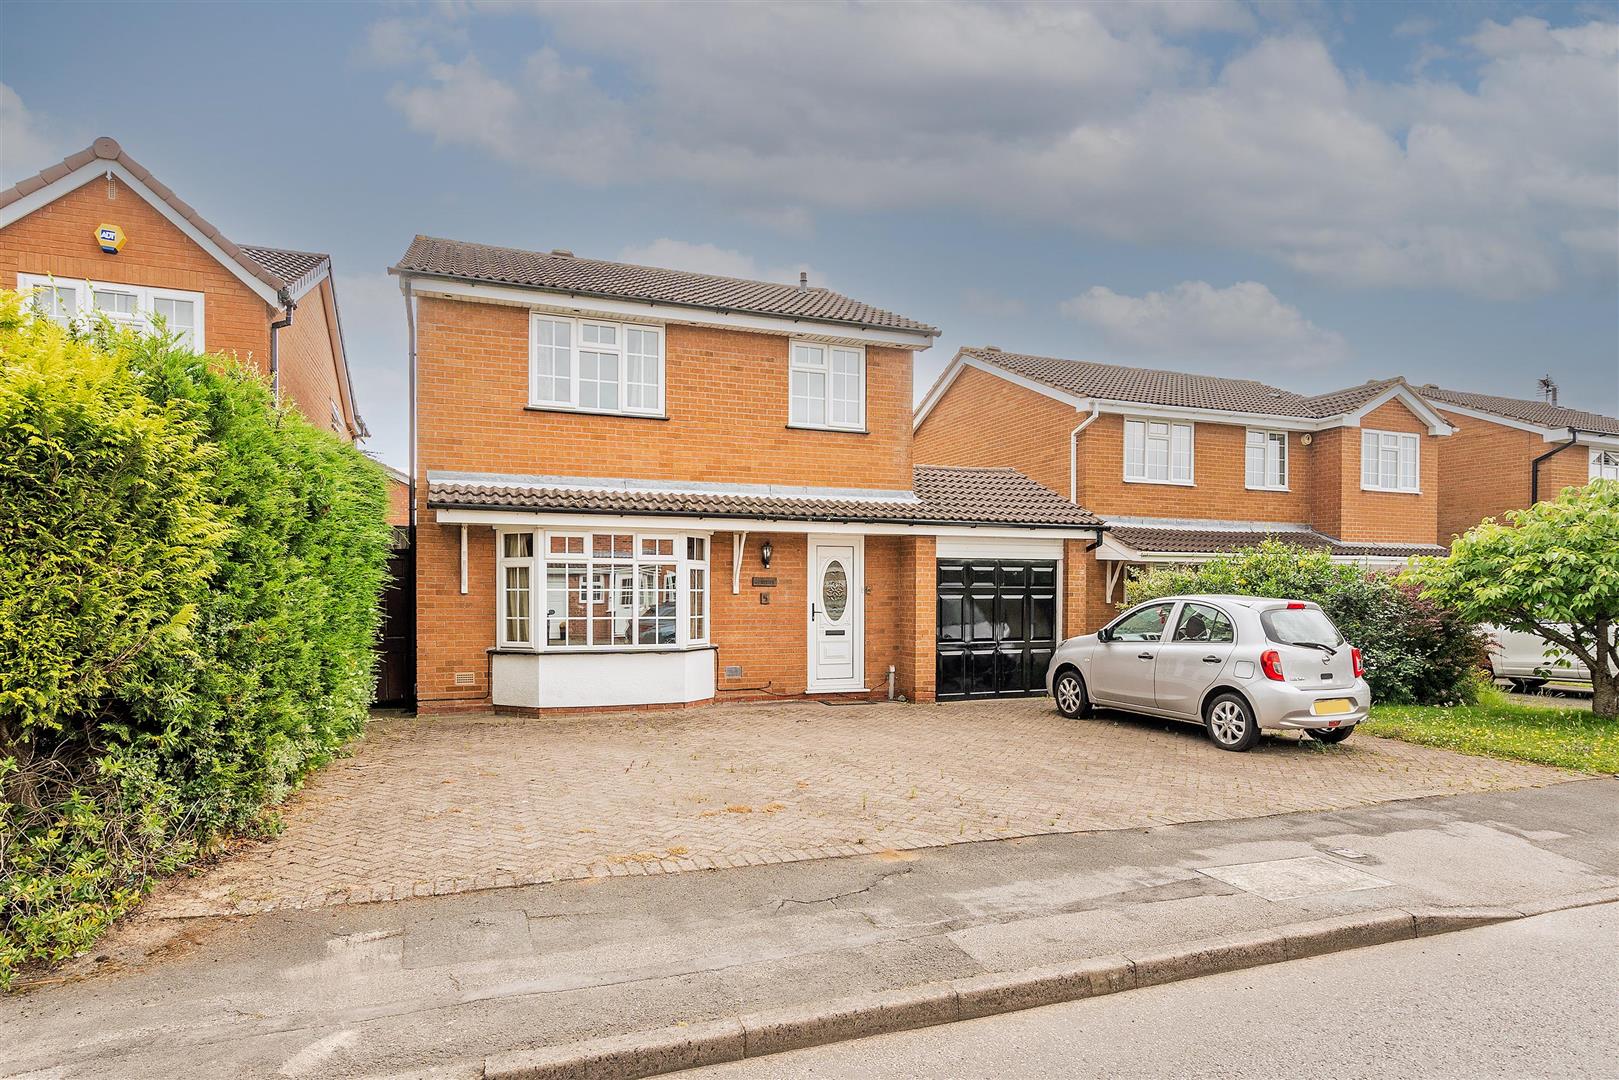 4 bed  for sale in Sandhills Crescent, Solihull, B91 